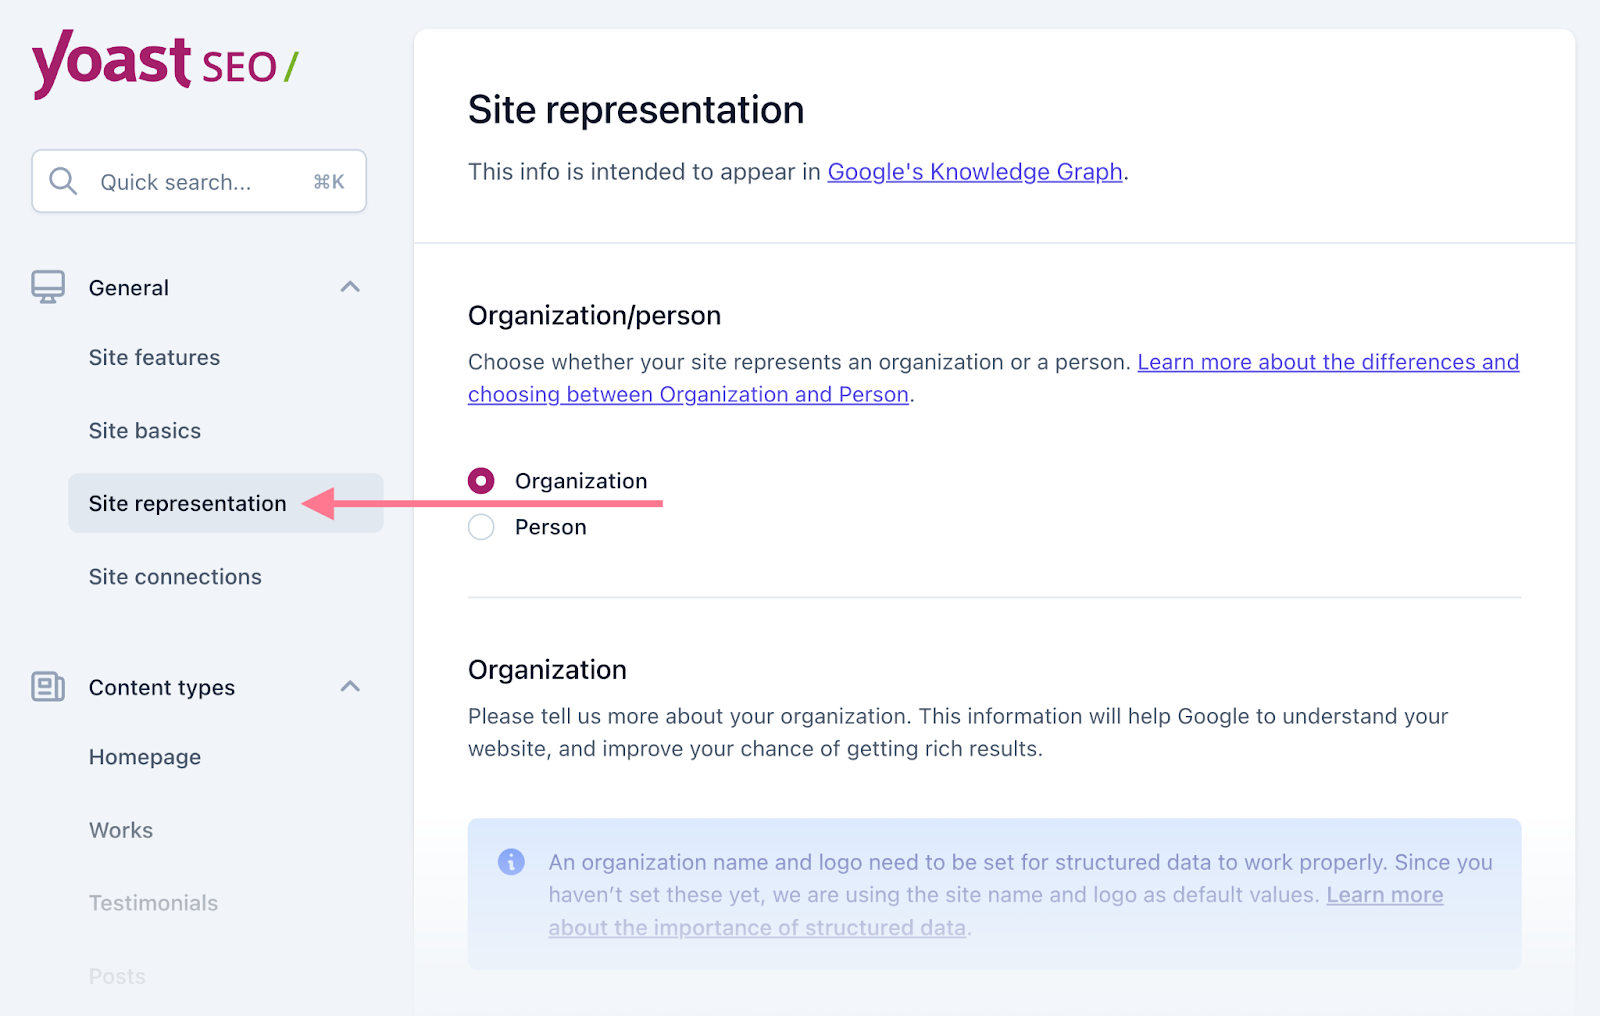 Site representation subsection